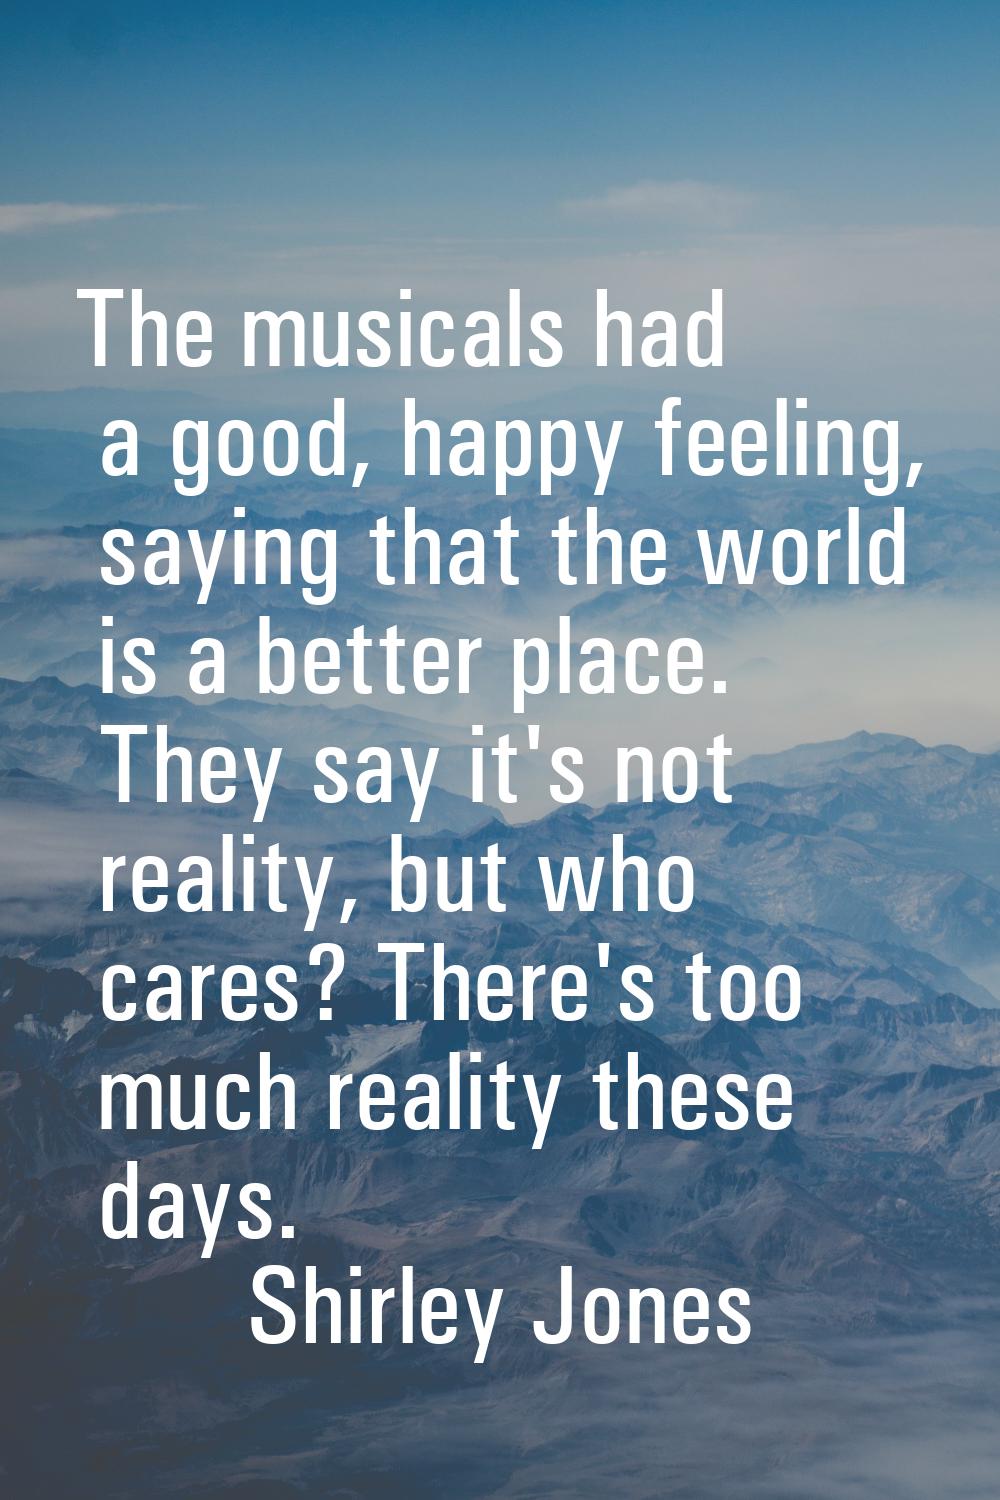 The musicals had a good, happy feeling, saying that the world is a better place. They say it's not 